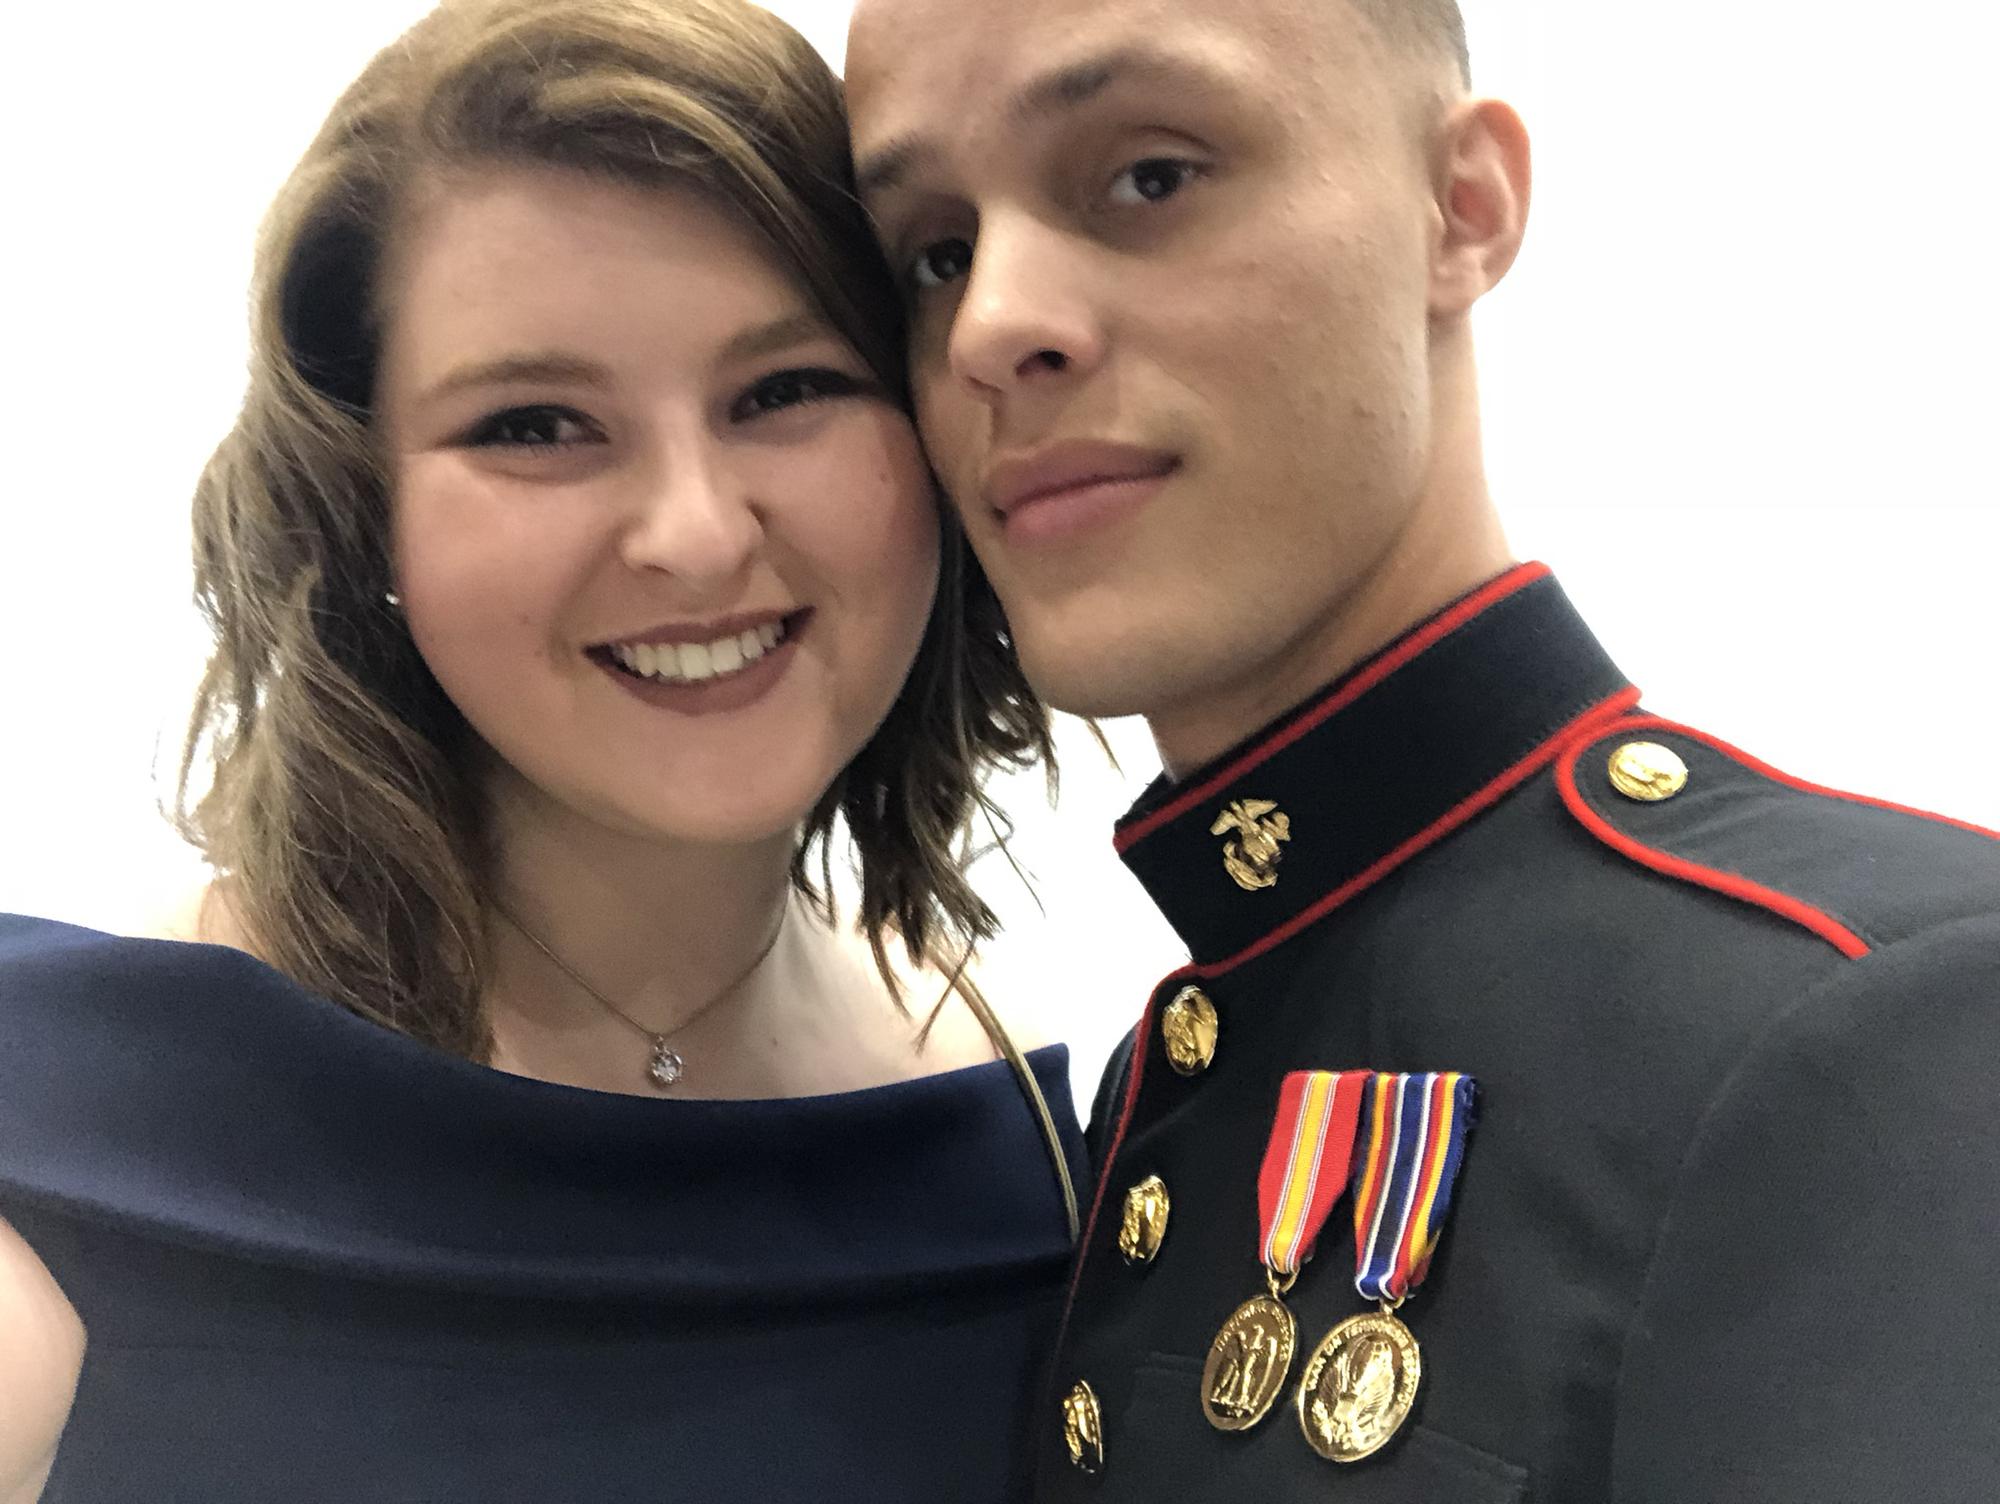 Our first Marine Corps Ball 🇺🇸 November 3, 2018